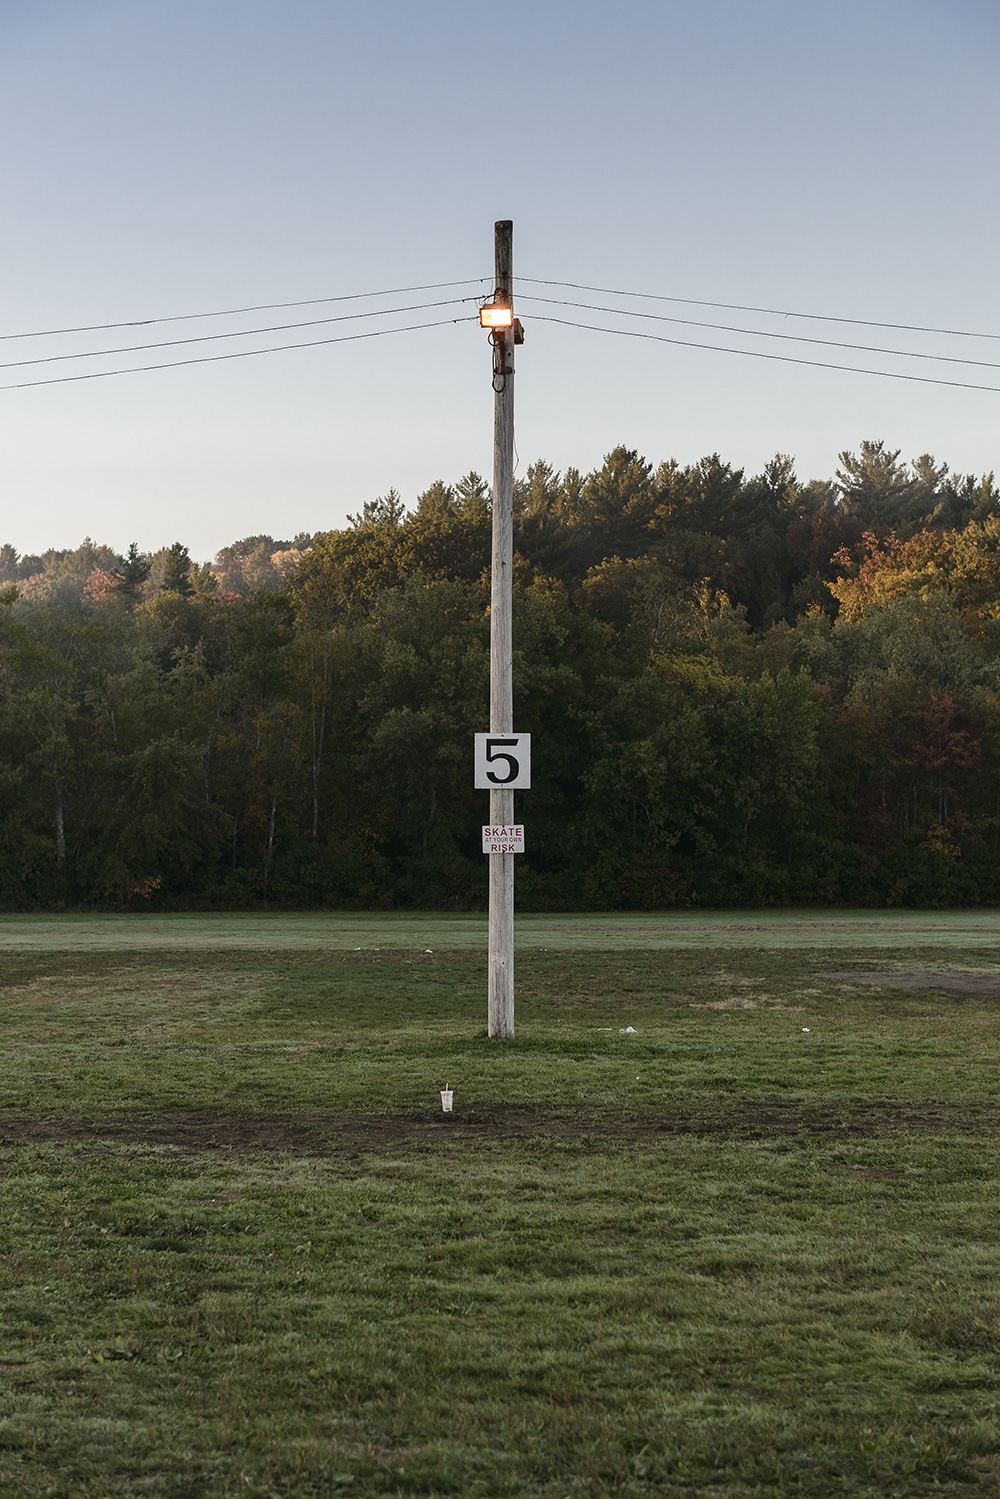 Empty fair parking lot. I love the light on this shot and the symmetry with the pole.